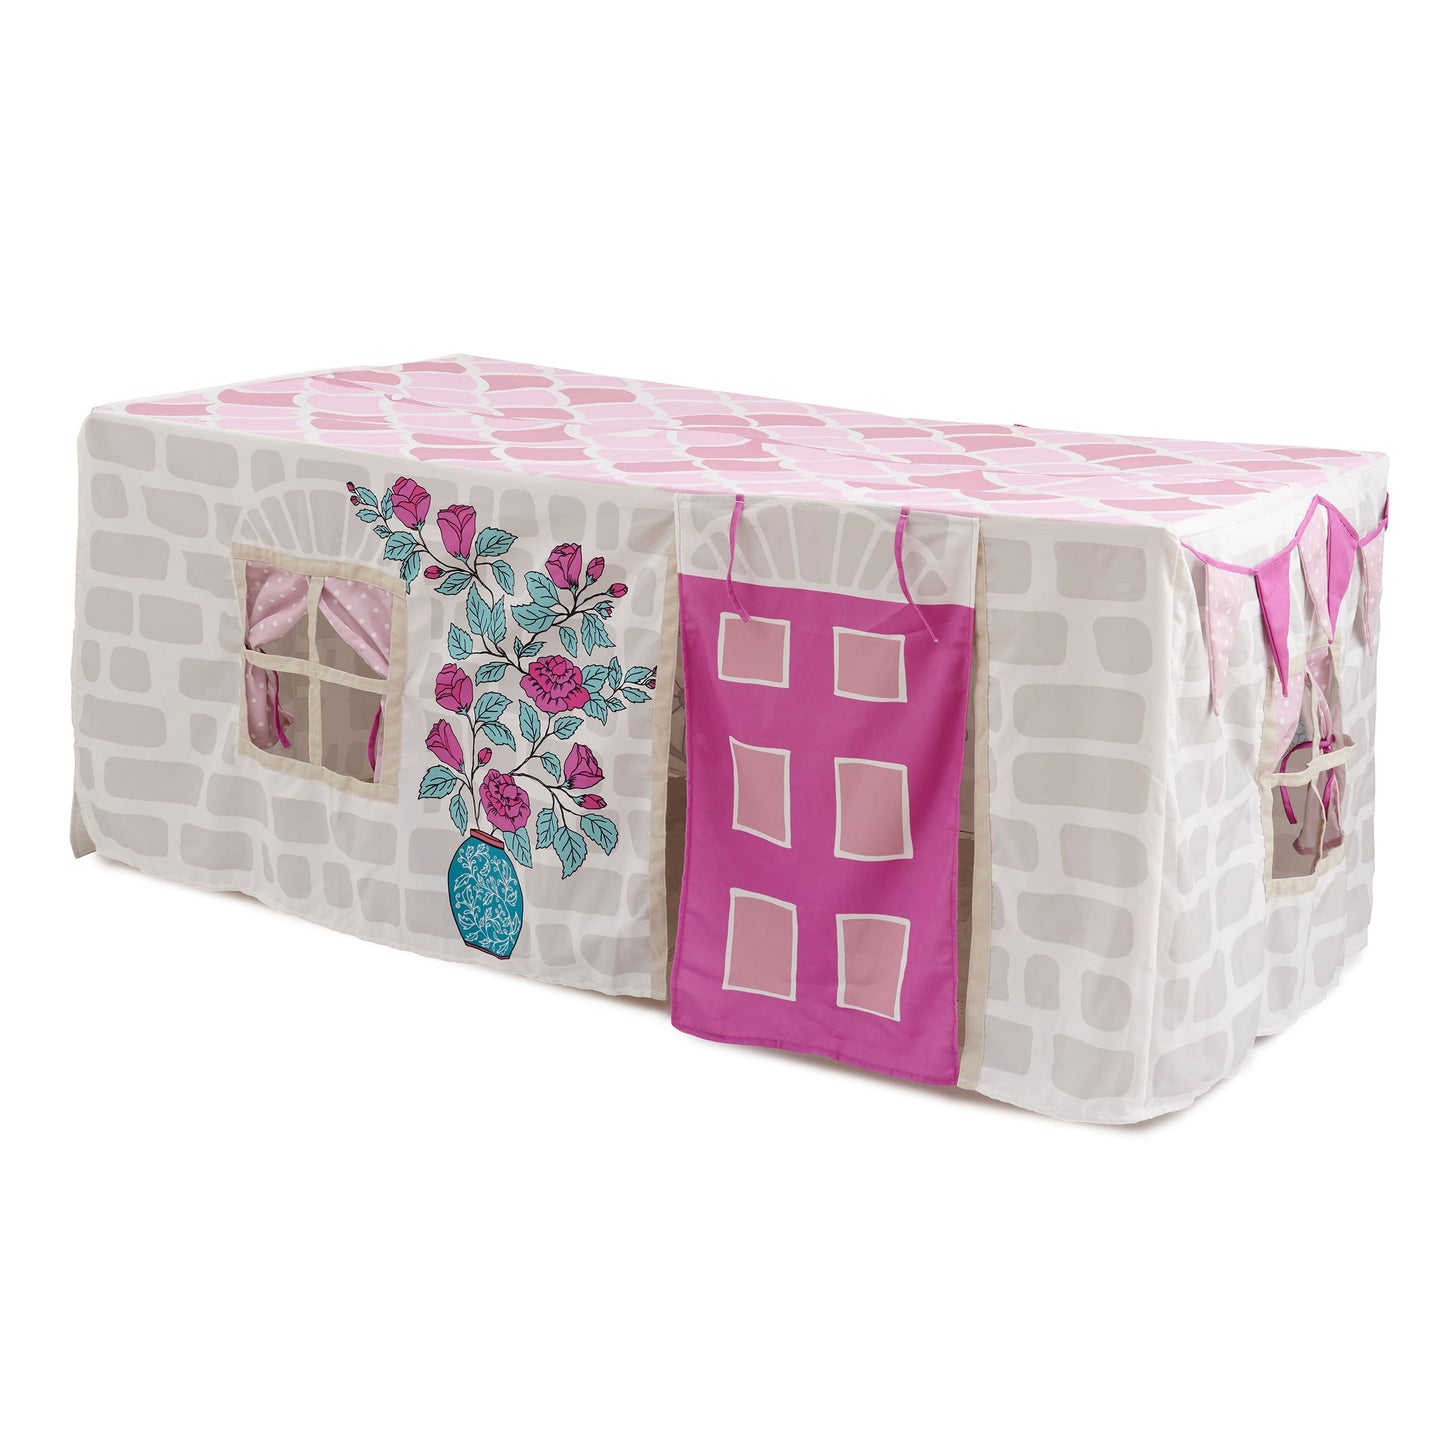 Image of Petite Maison Play Home Sweet Home Table Tent Cubby